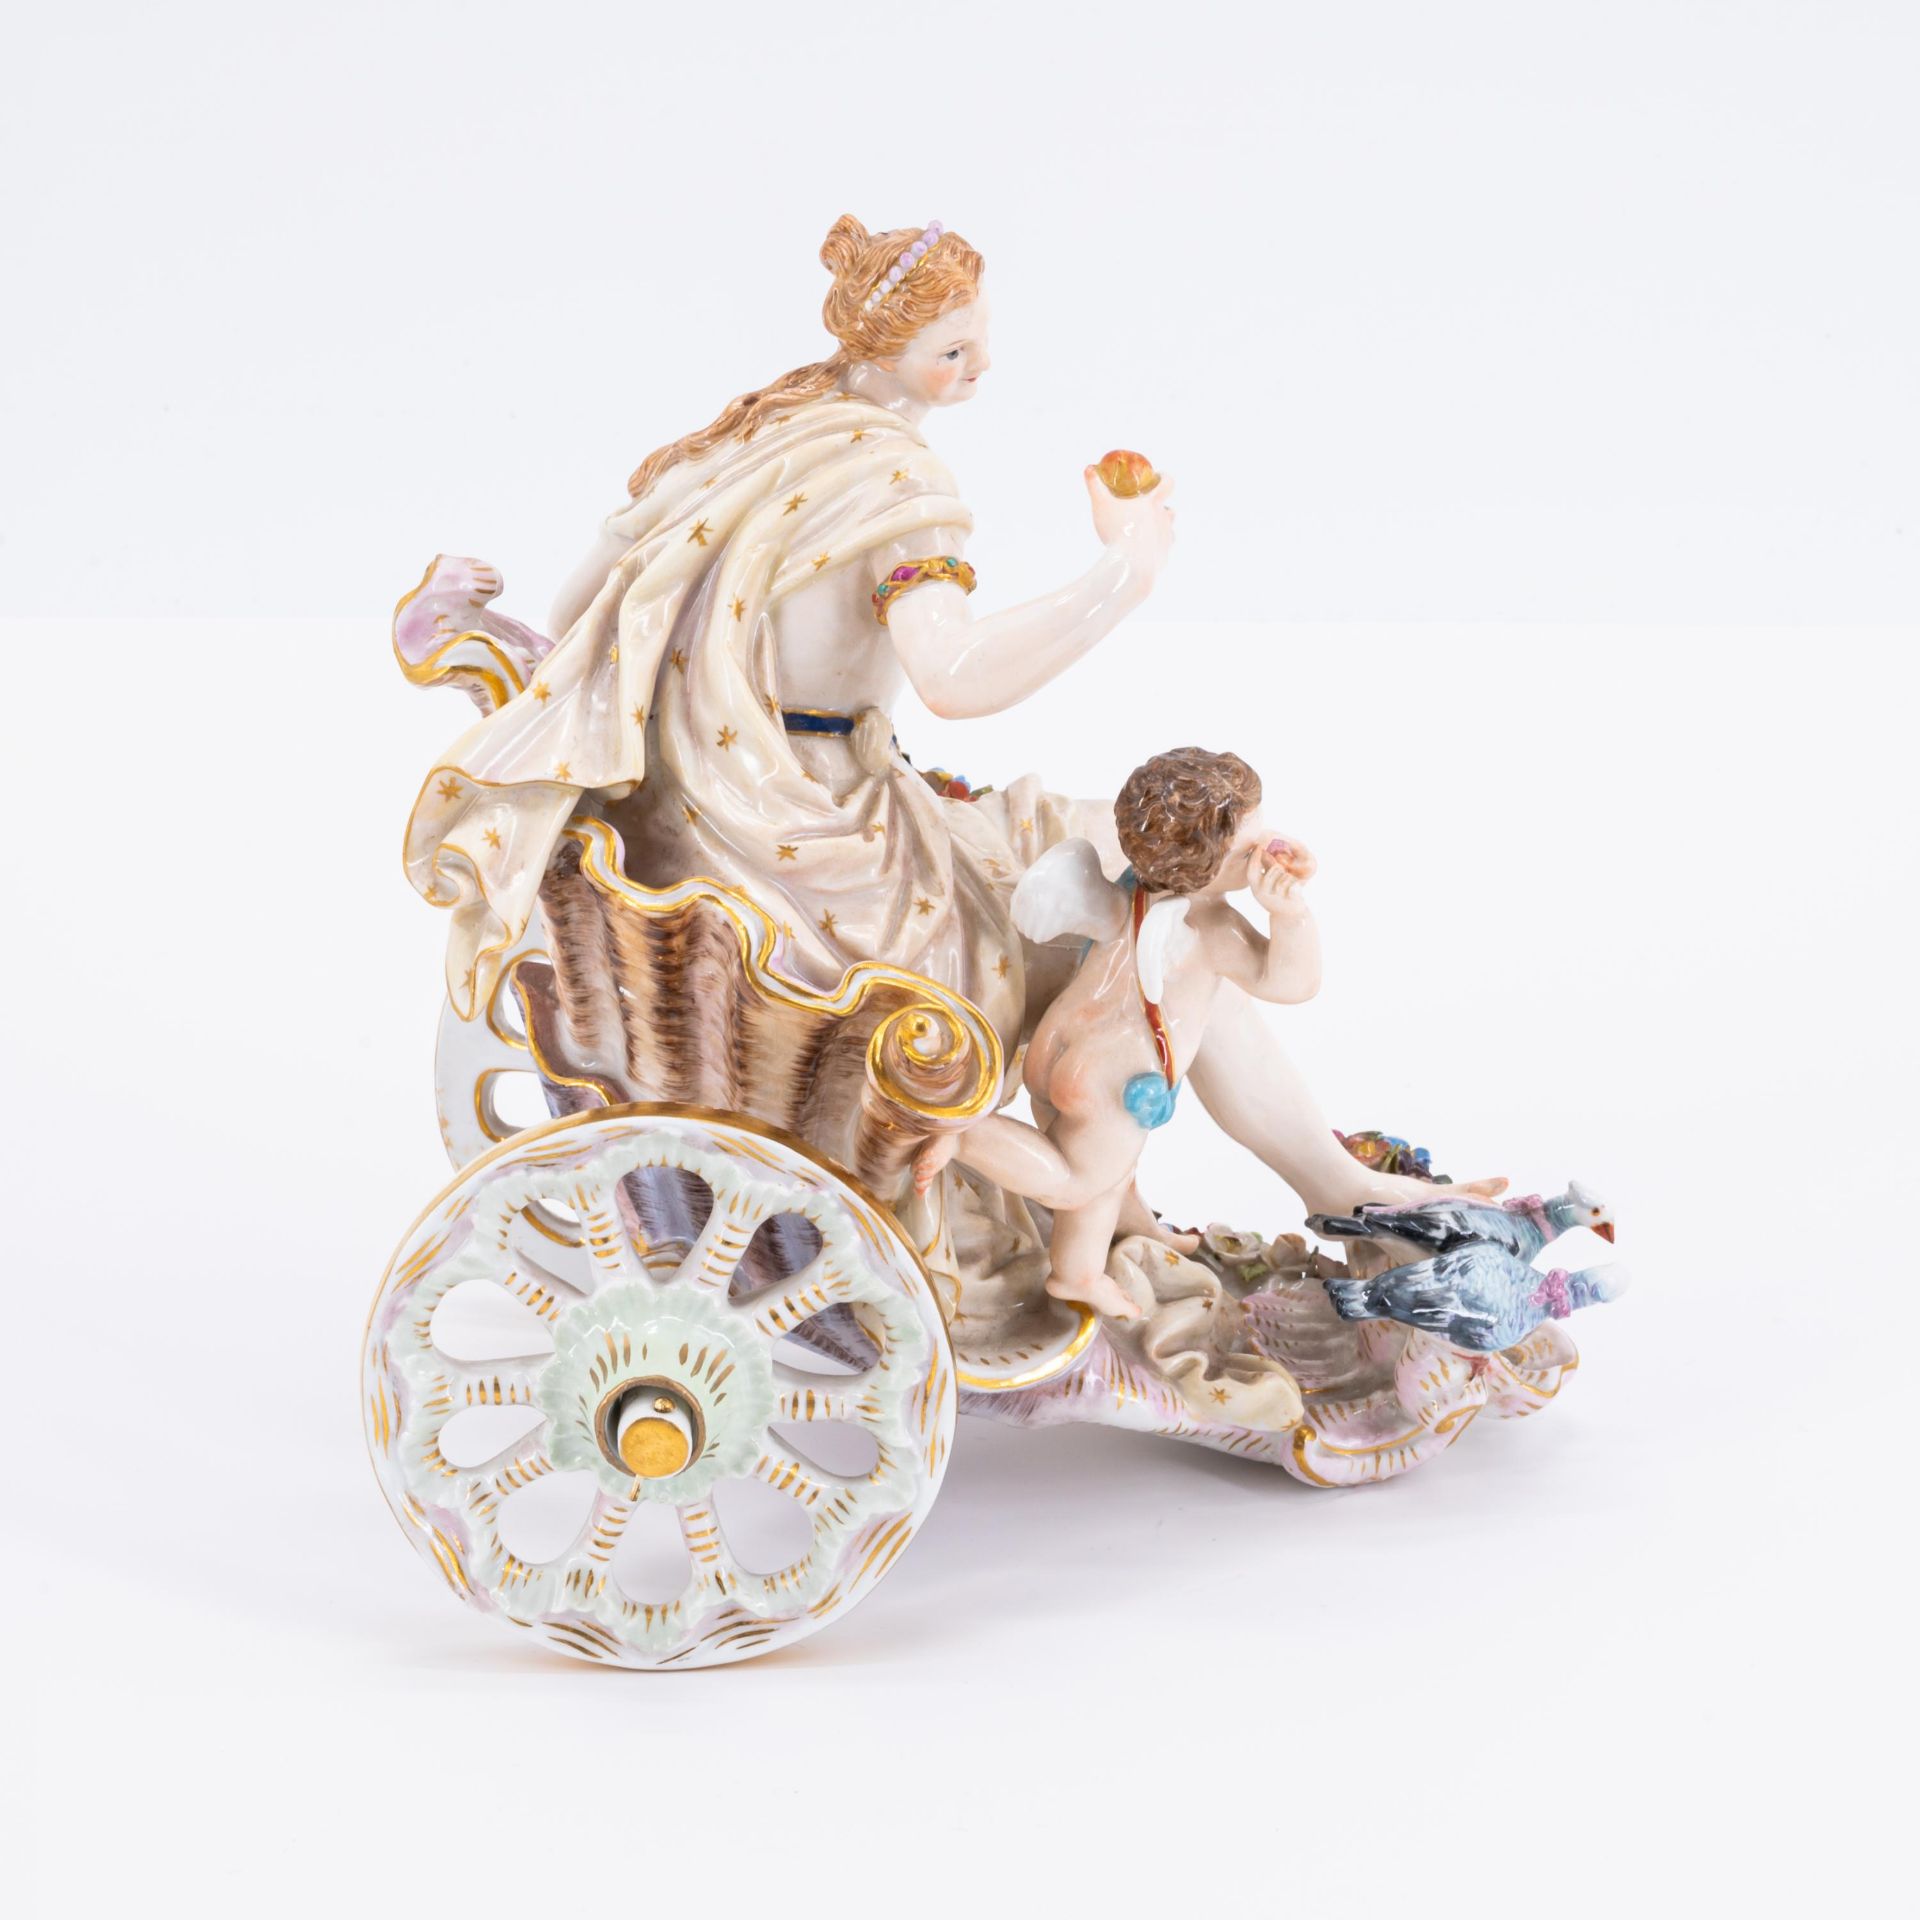 Venus on the chariot - Image 4 of 5